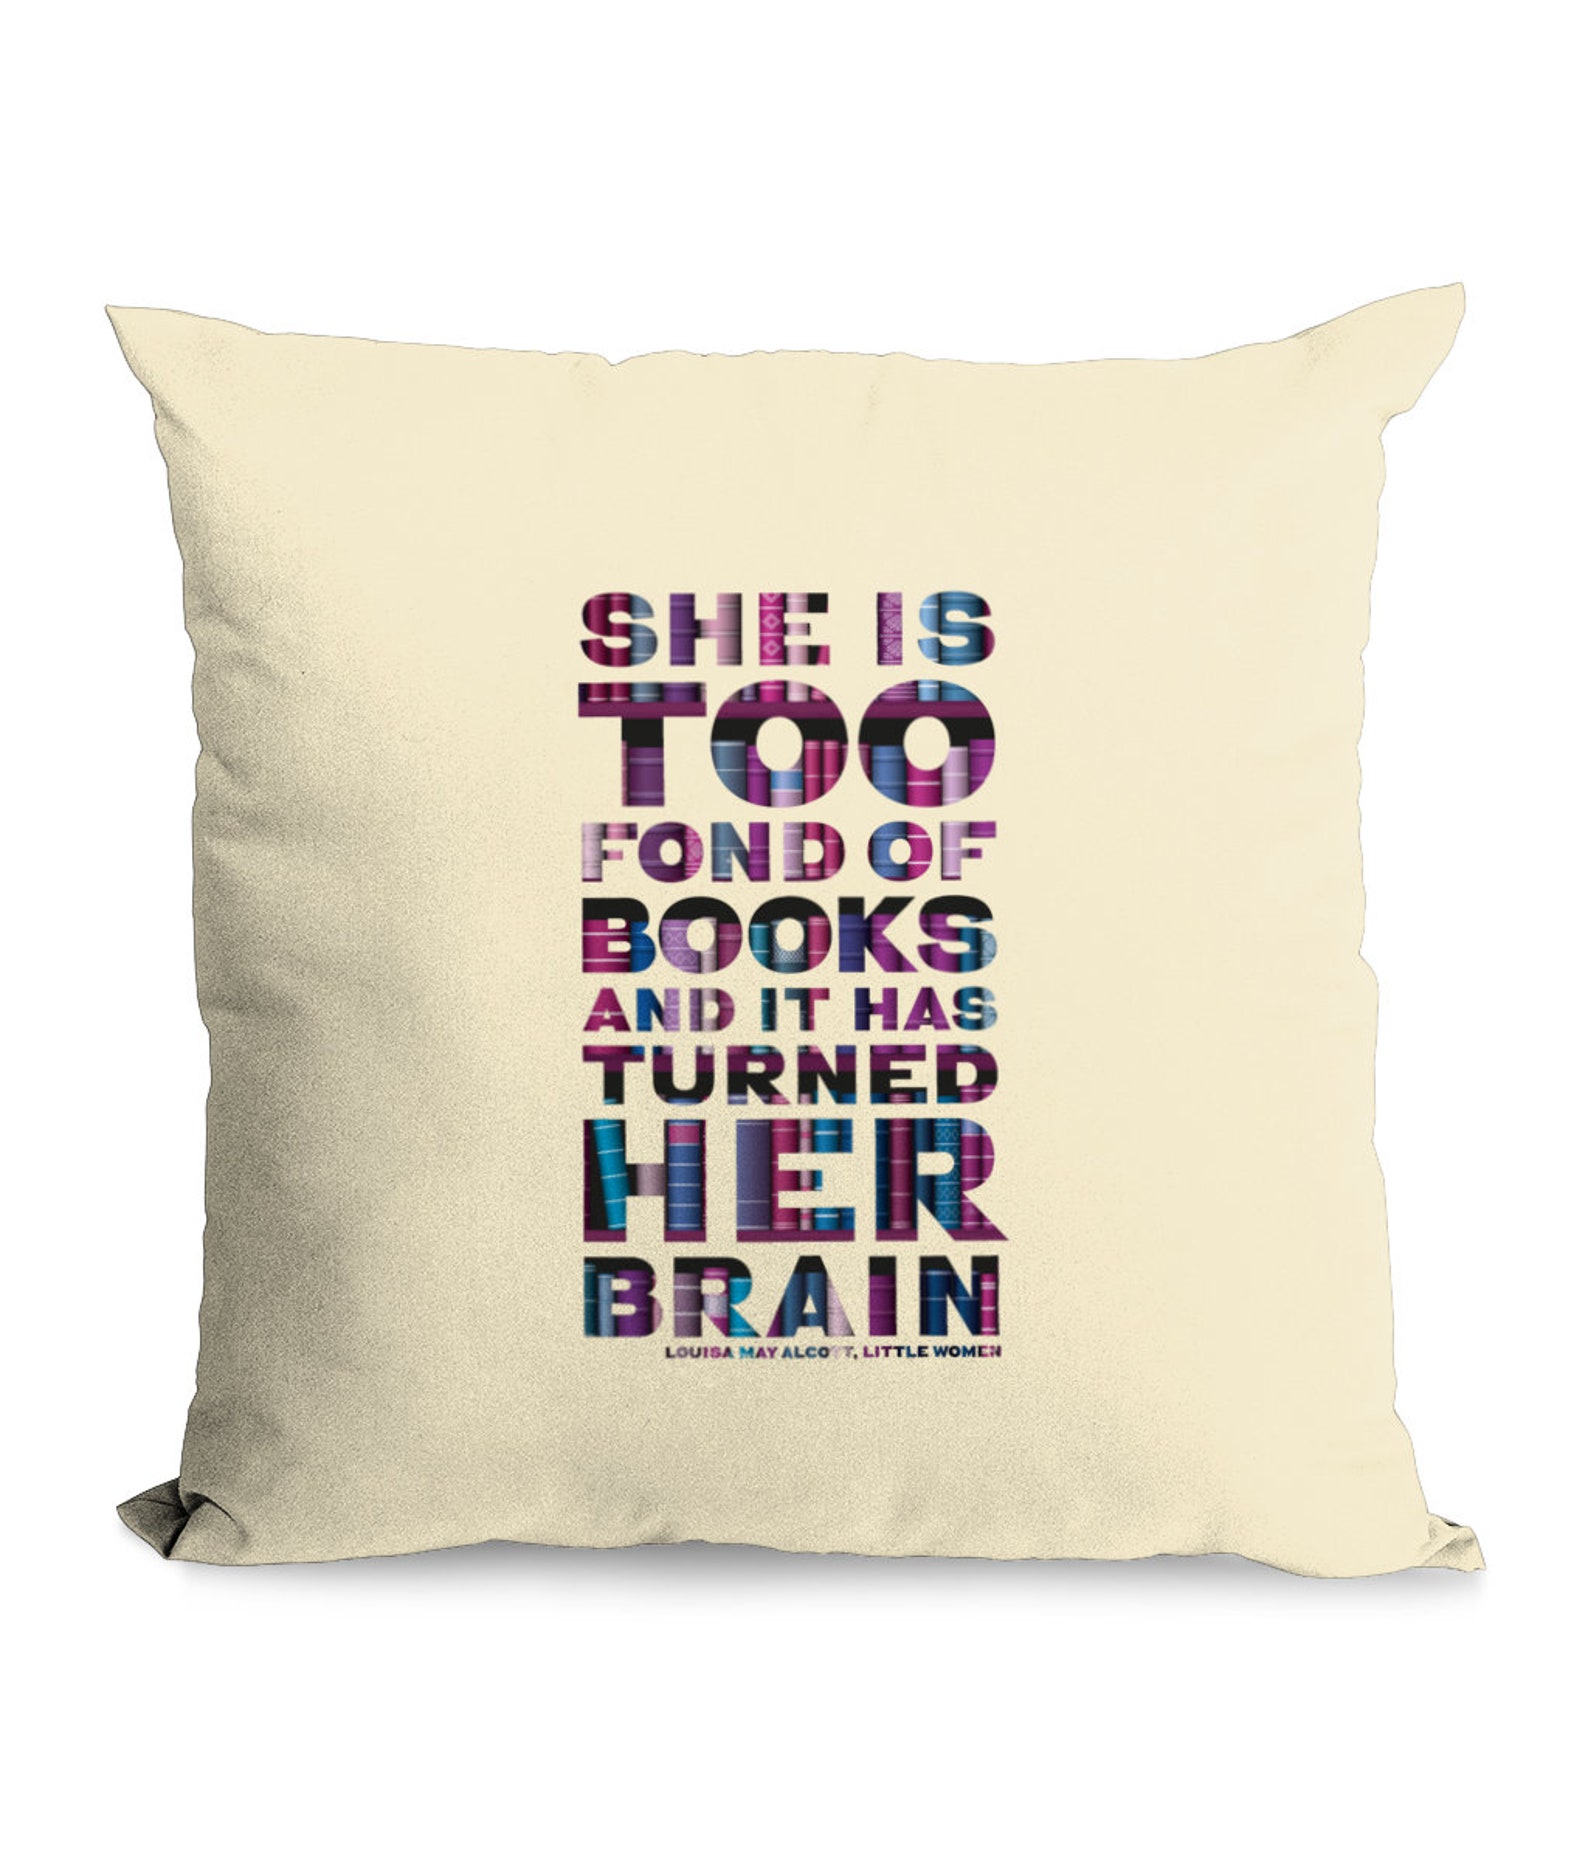 Throw cushion with the quote "she is too fond of books and it has turned her brain"